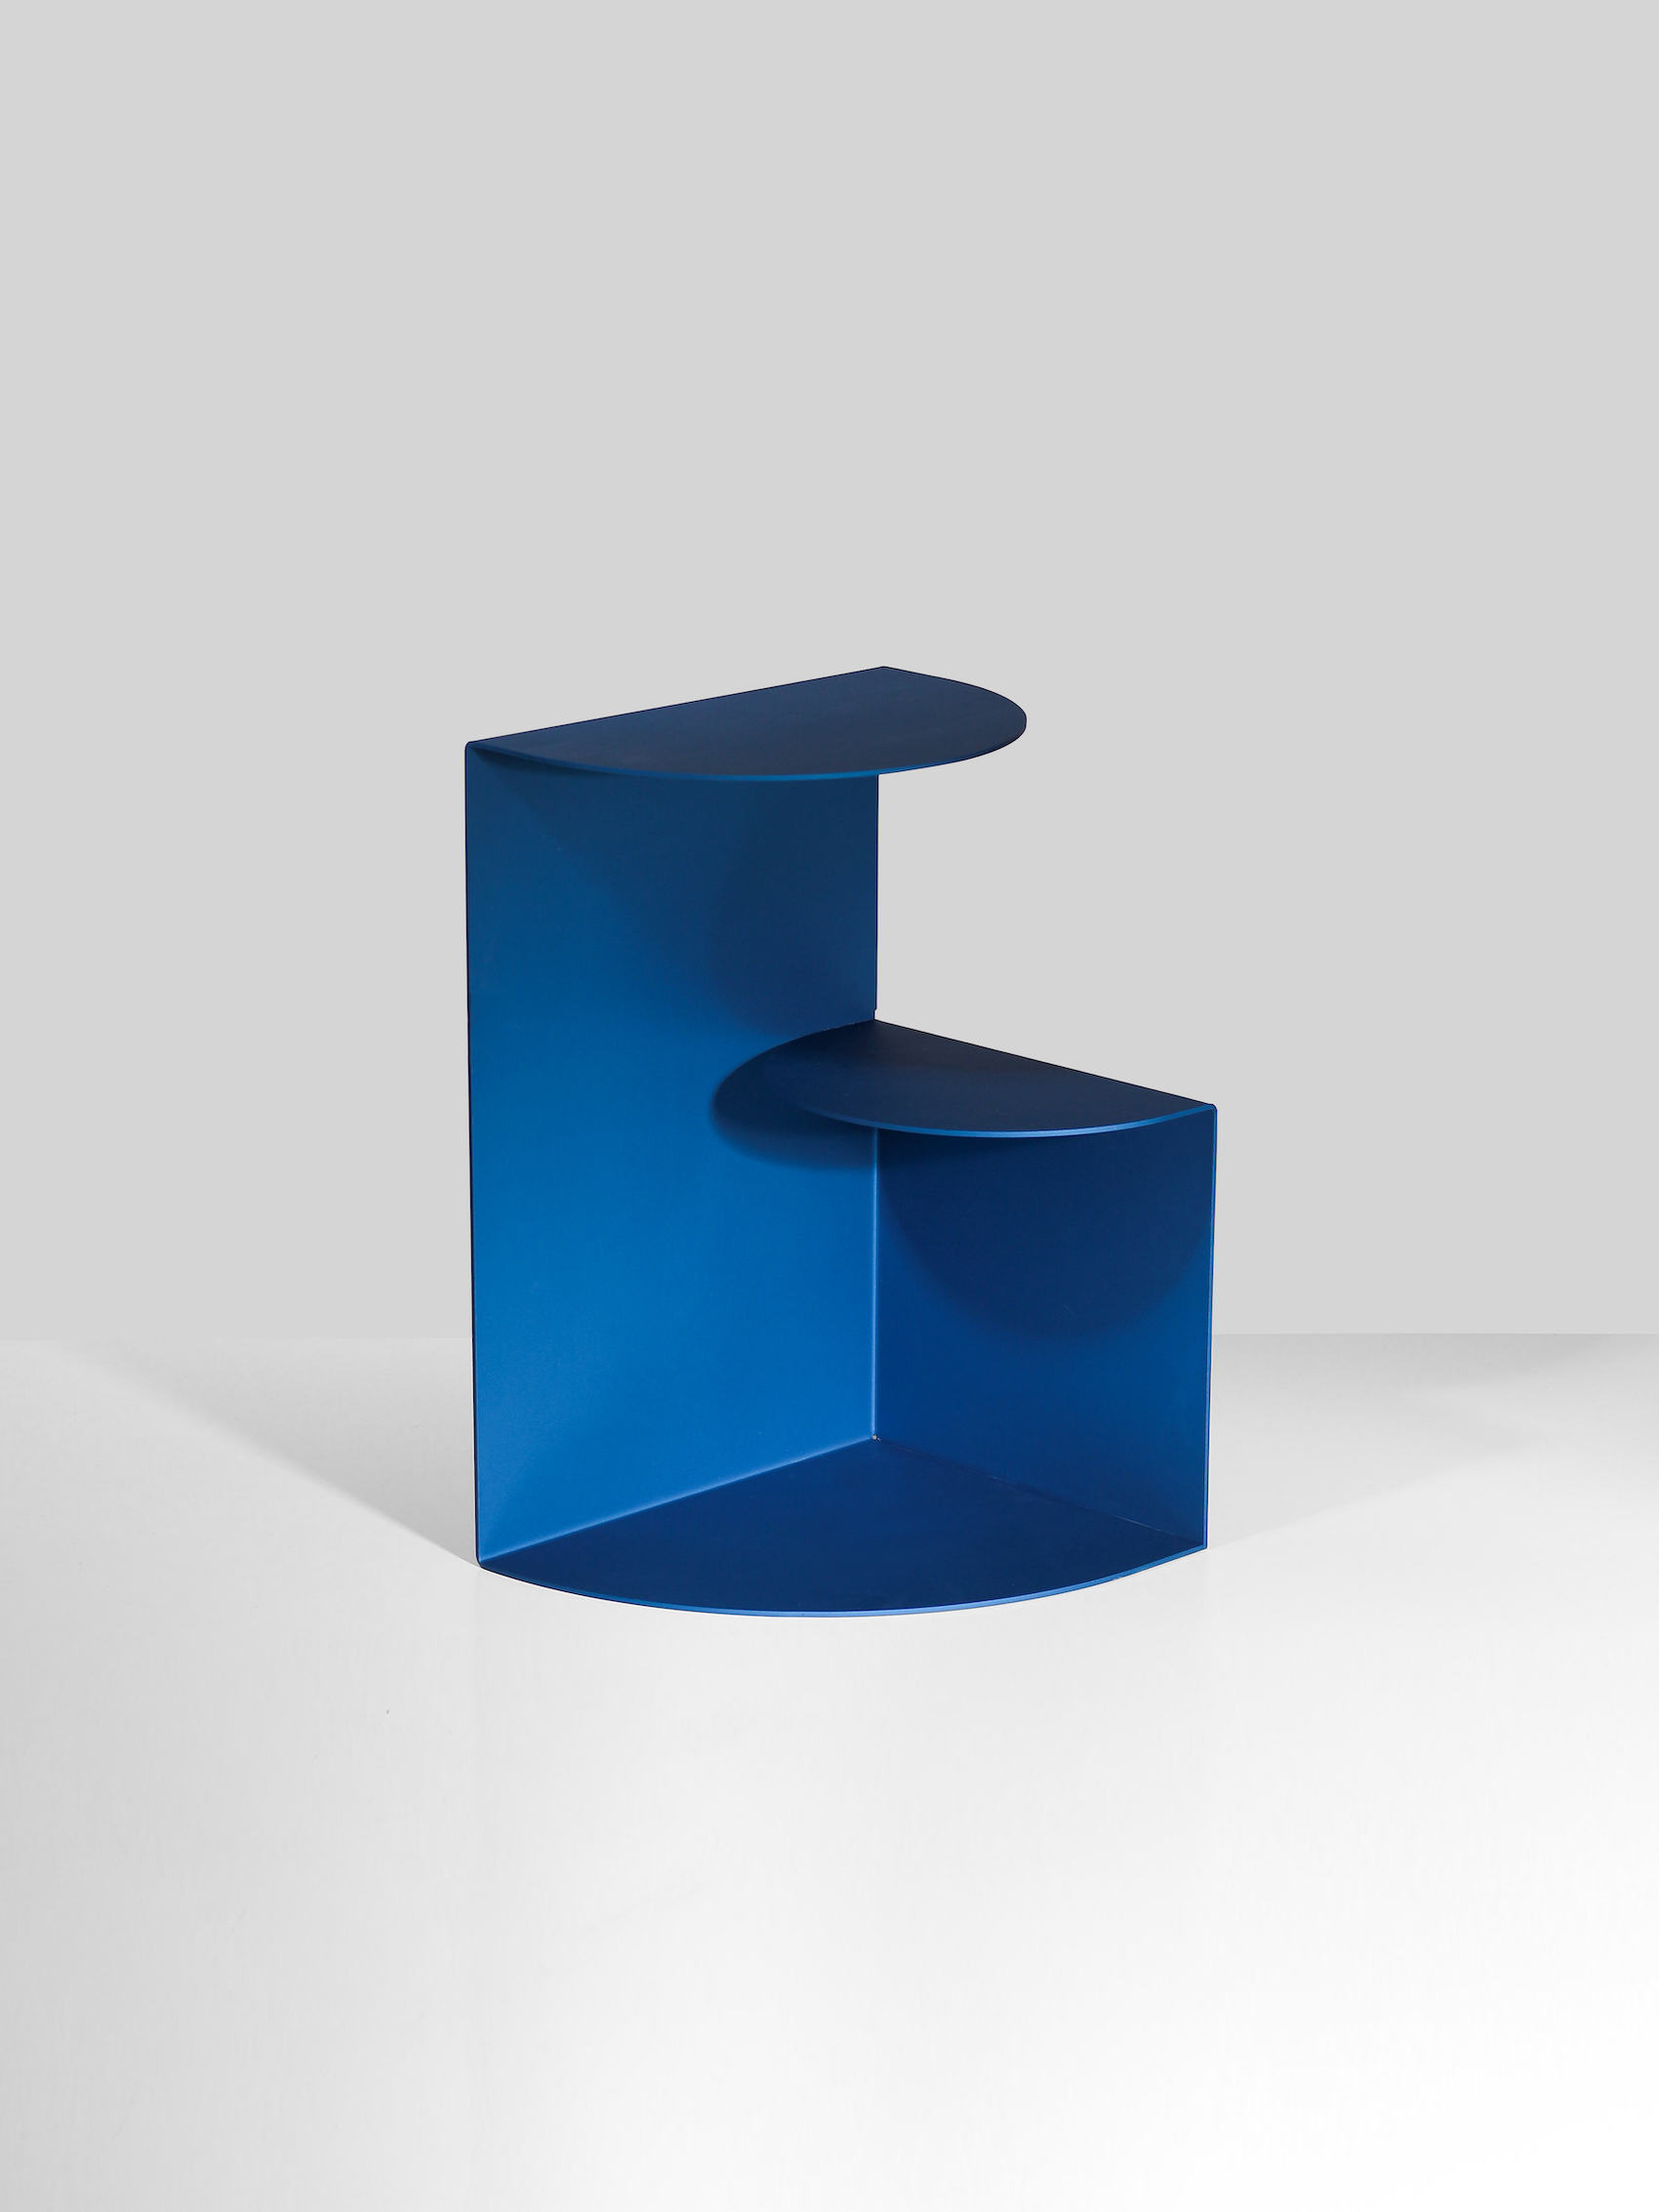 Minimalist Side Table "Slope" by Hayo Gebauer